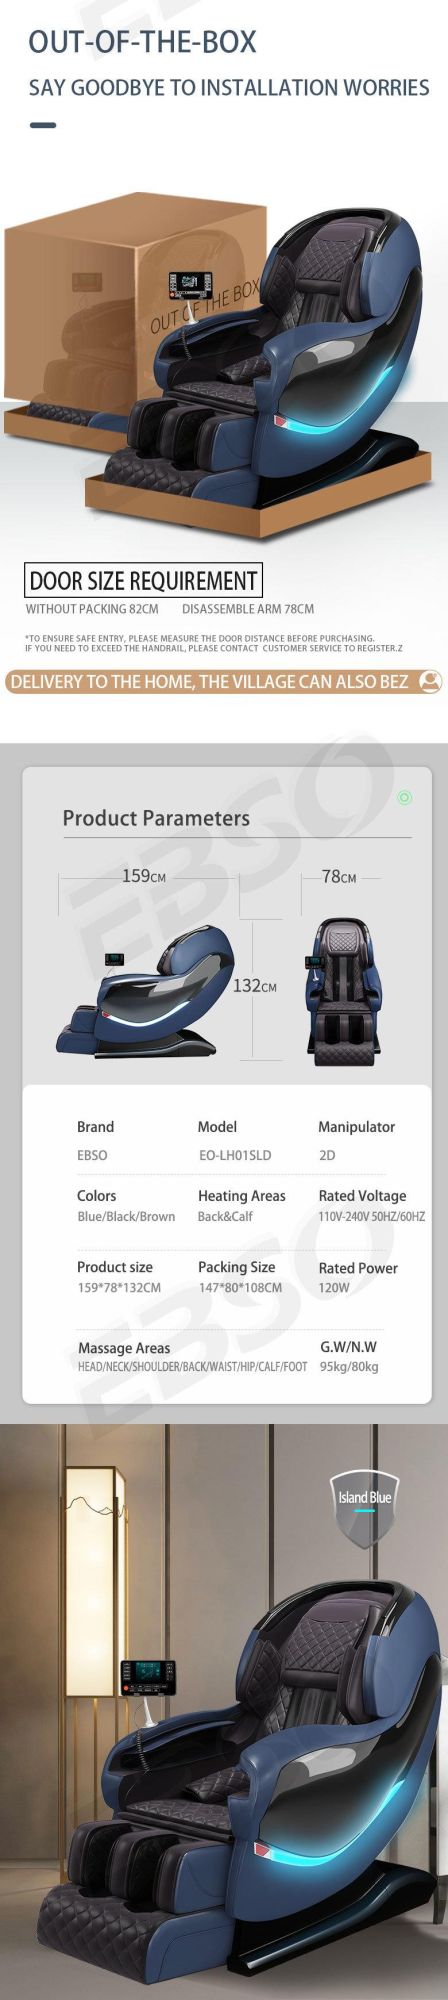 New 3D Full Body Coin and Bill Vending Massage Chair with Credit Card Visa